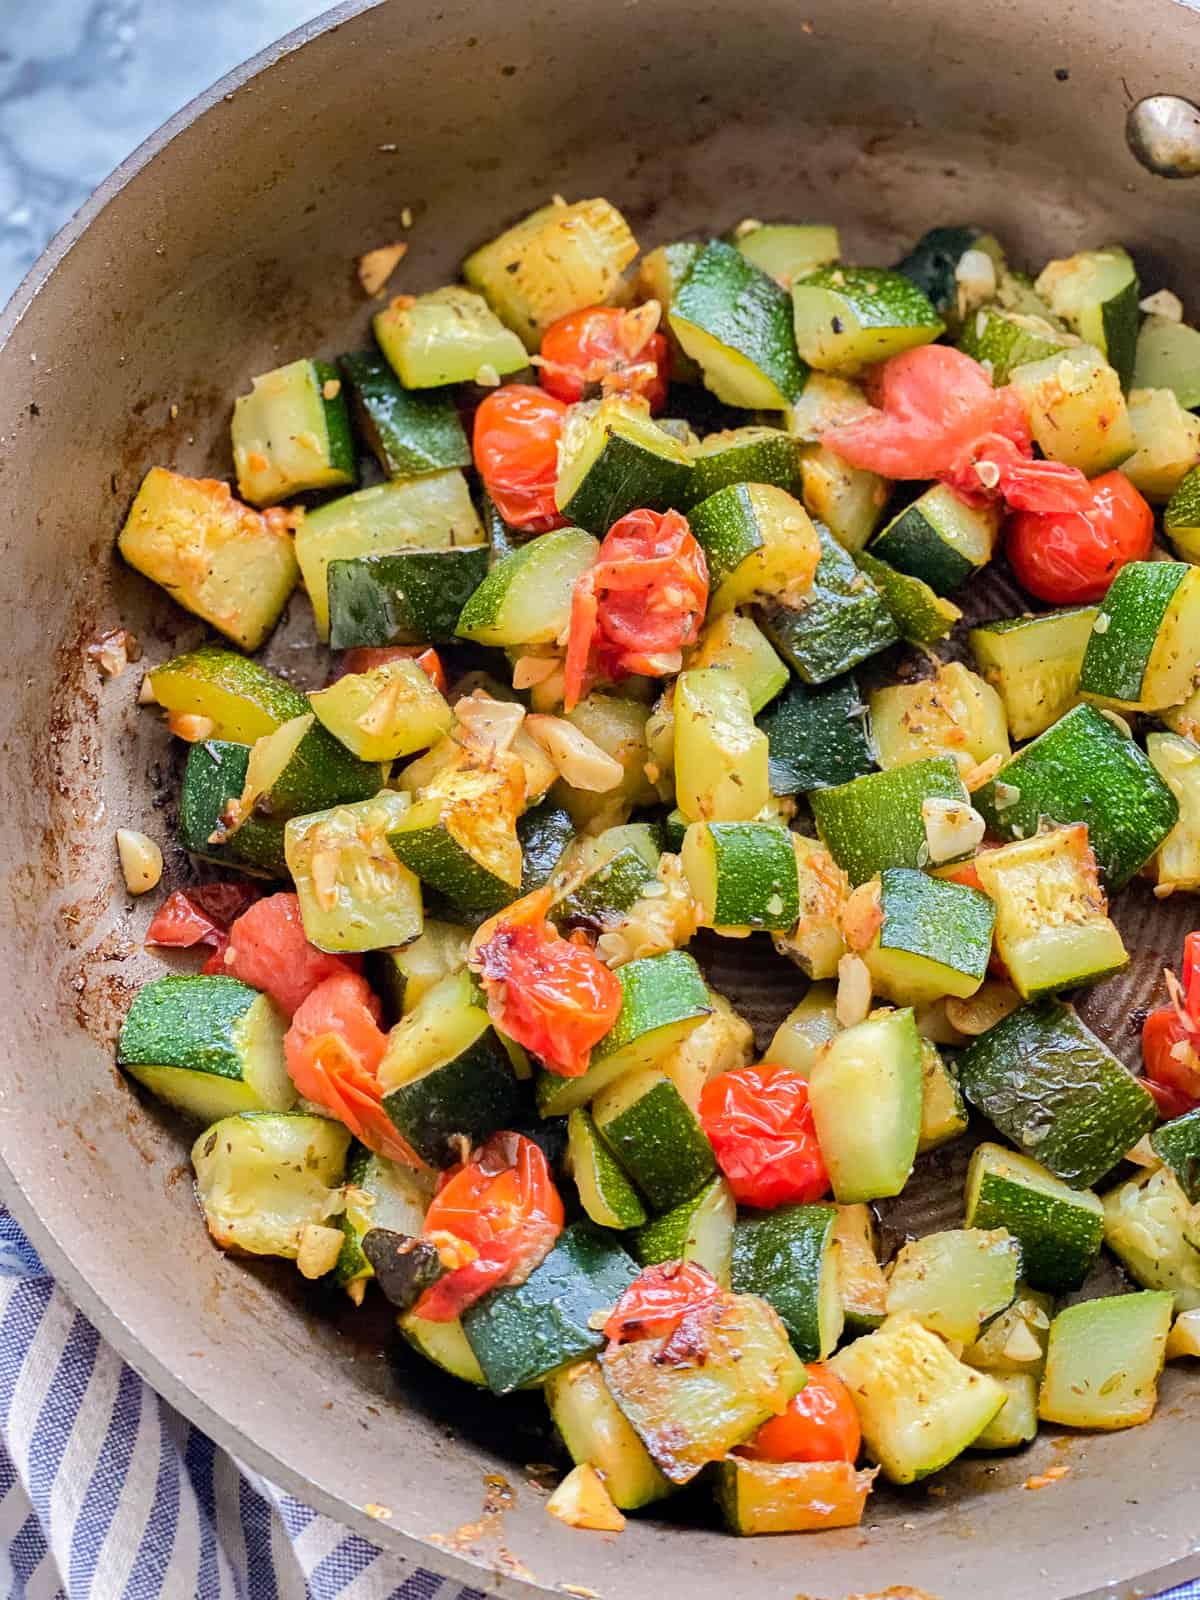 Sautéed zucchini and tomatoes resting in a pan.